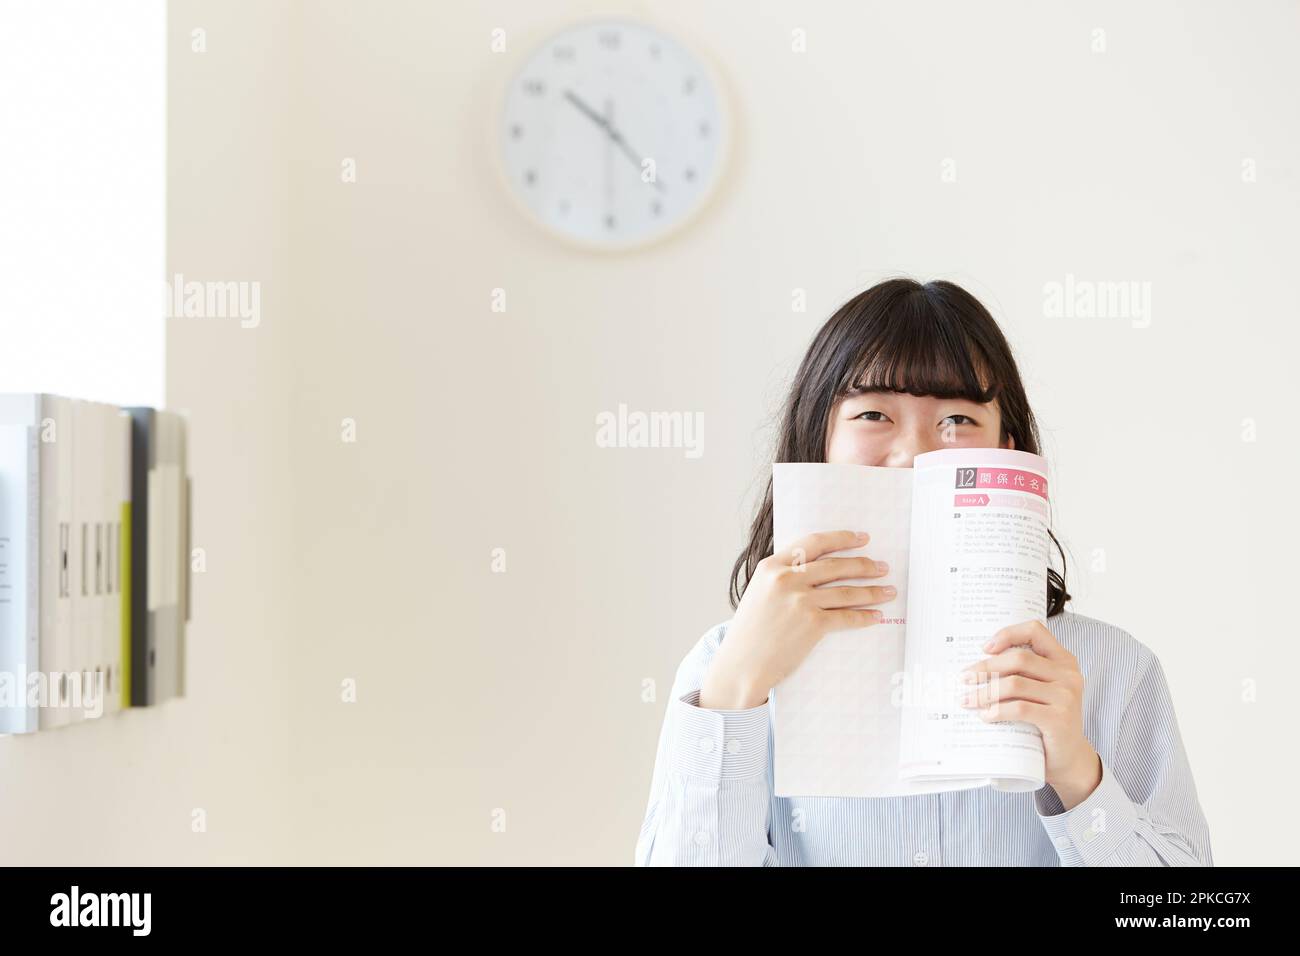 High school girl laughing while covering her mouth with a reference book Stock Photo